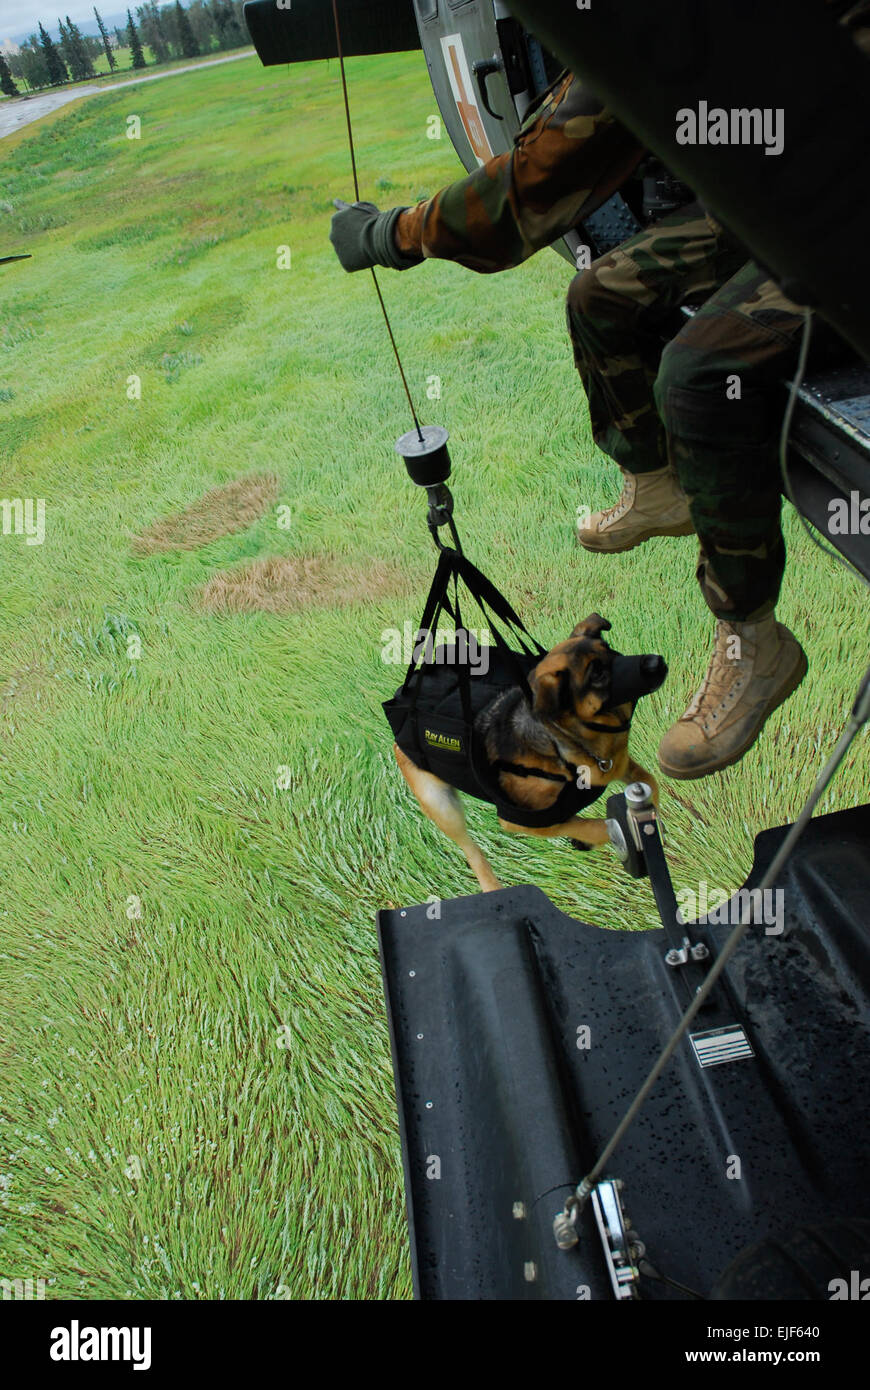 Cezar, a military working dog assigned to the 28th Military Police Detachment at Fort Wainwright, Alaska, rides up to a medical evacuation helicopter on the aircraft’s hoist.  Staff Sgt. Matthew T MacRoberts Released Stock Photo